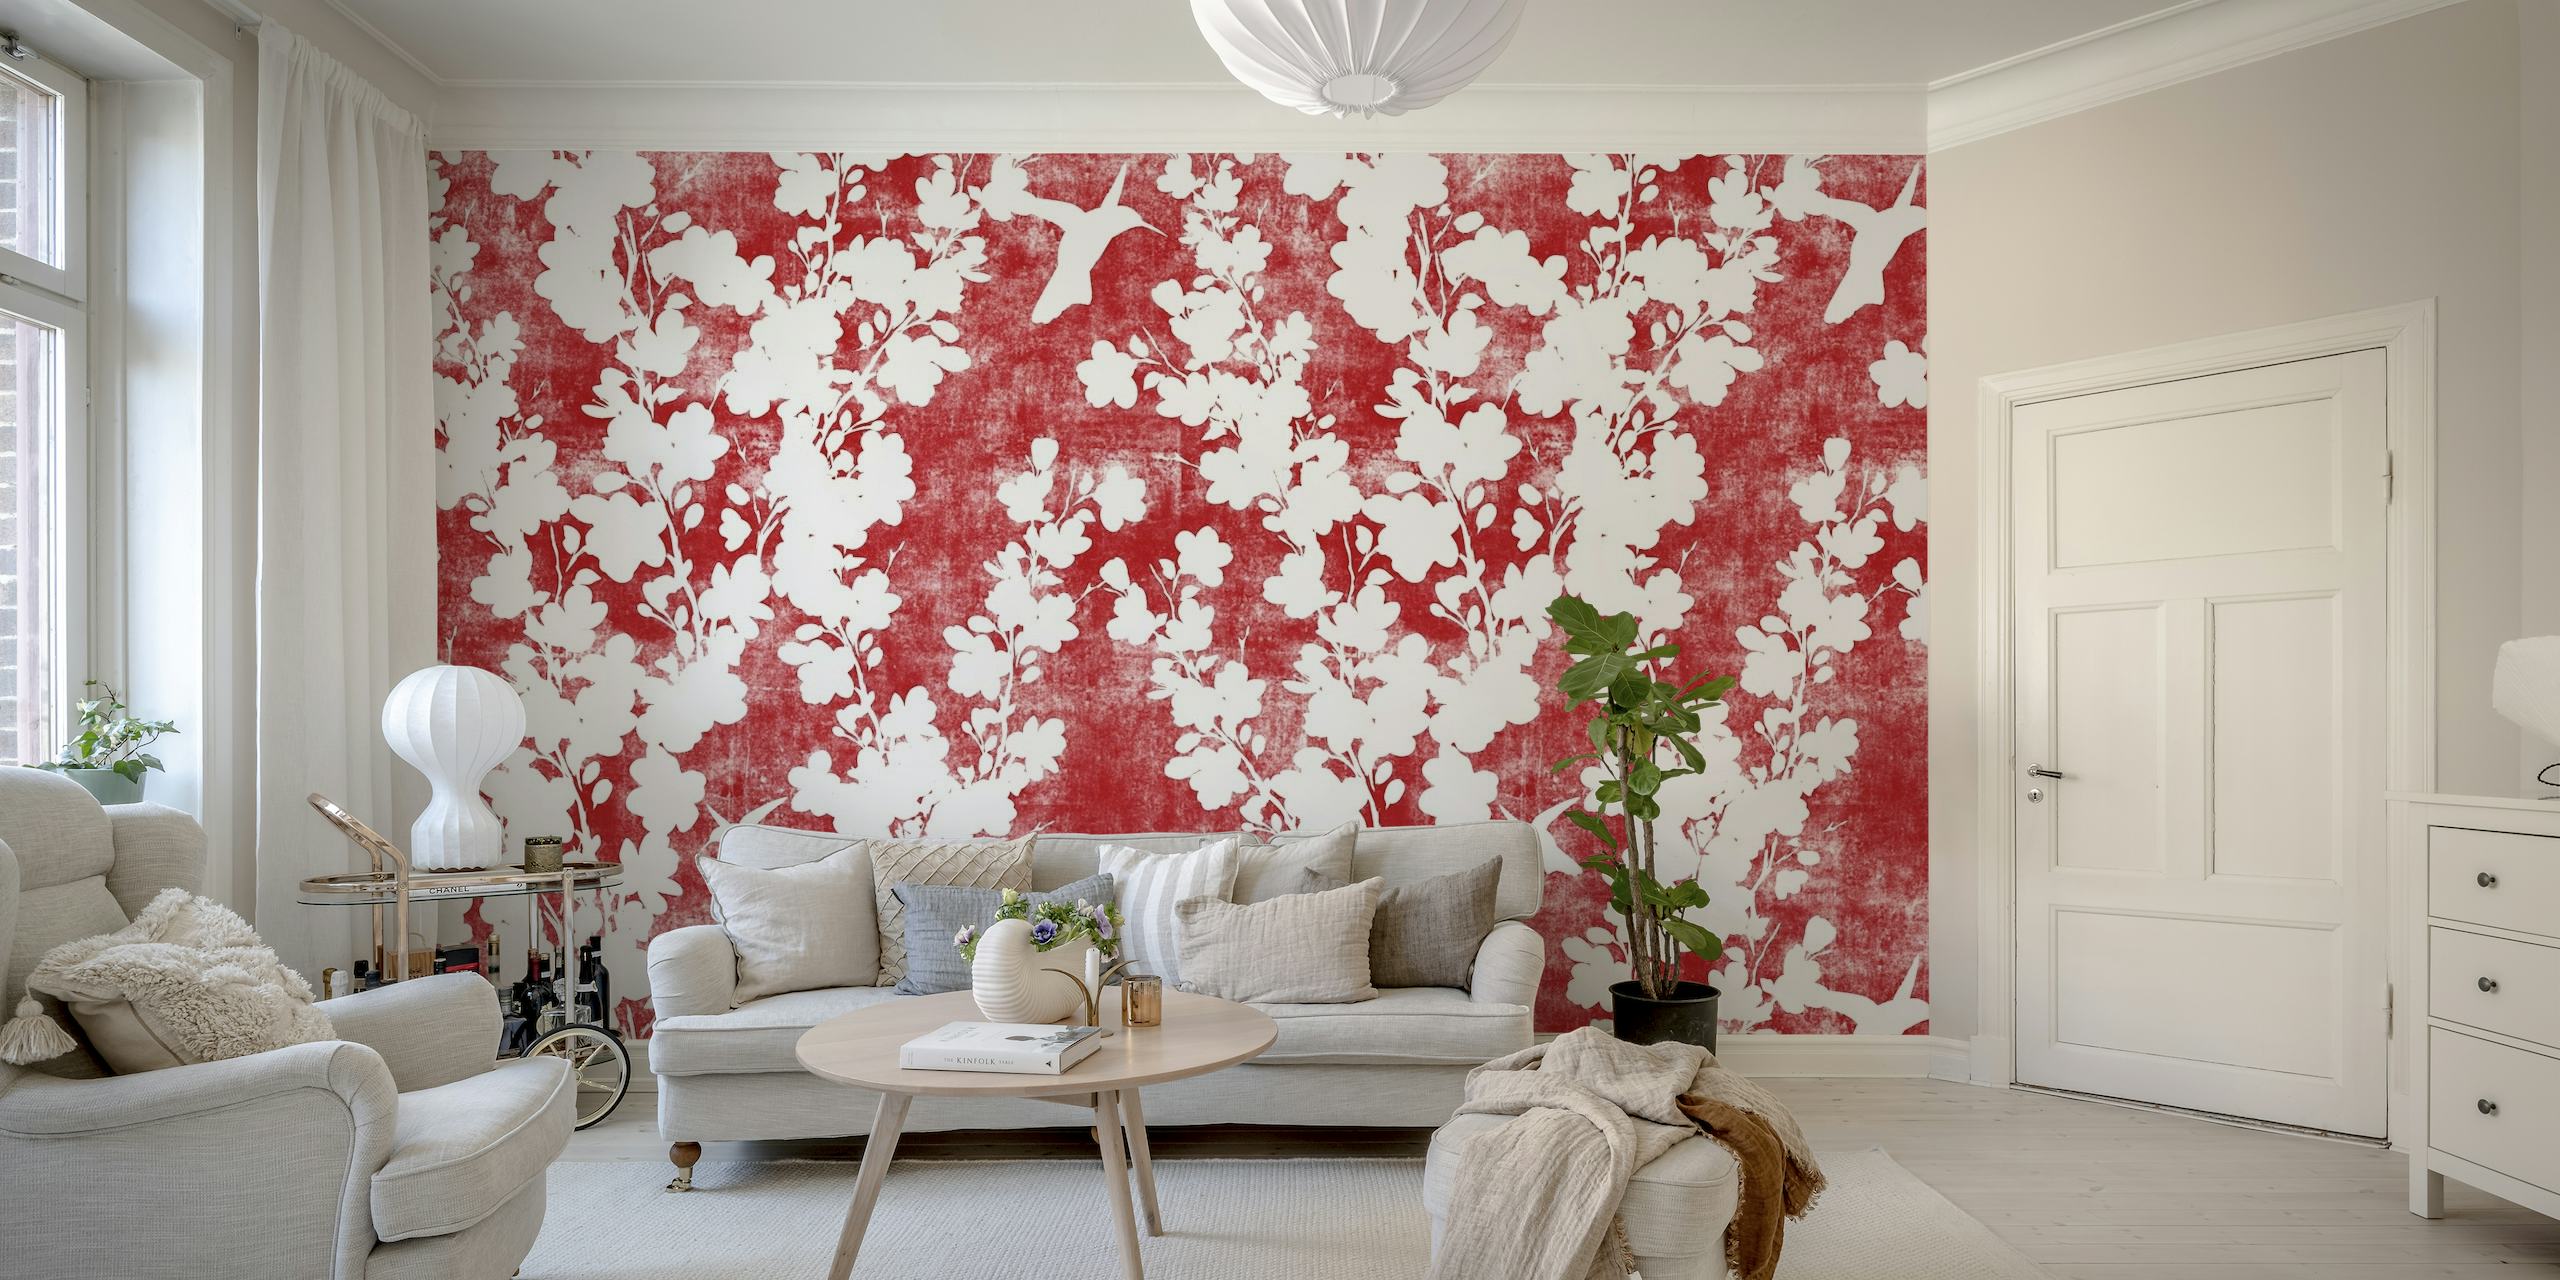 Scarlet red cherry blossom silhouette behang